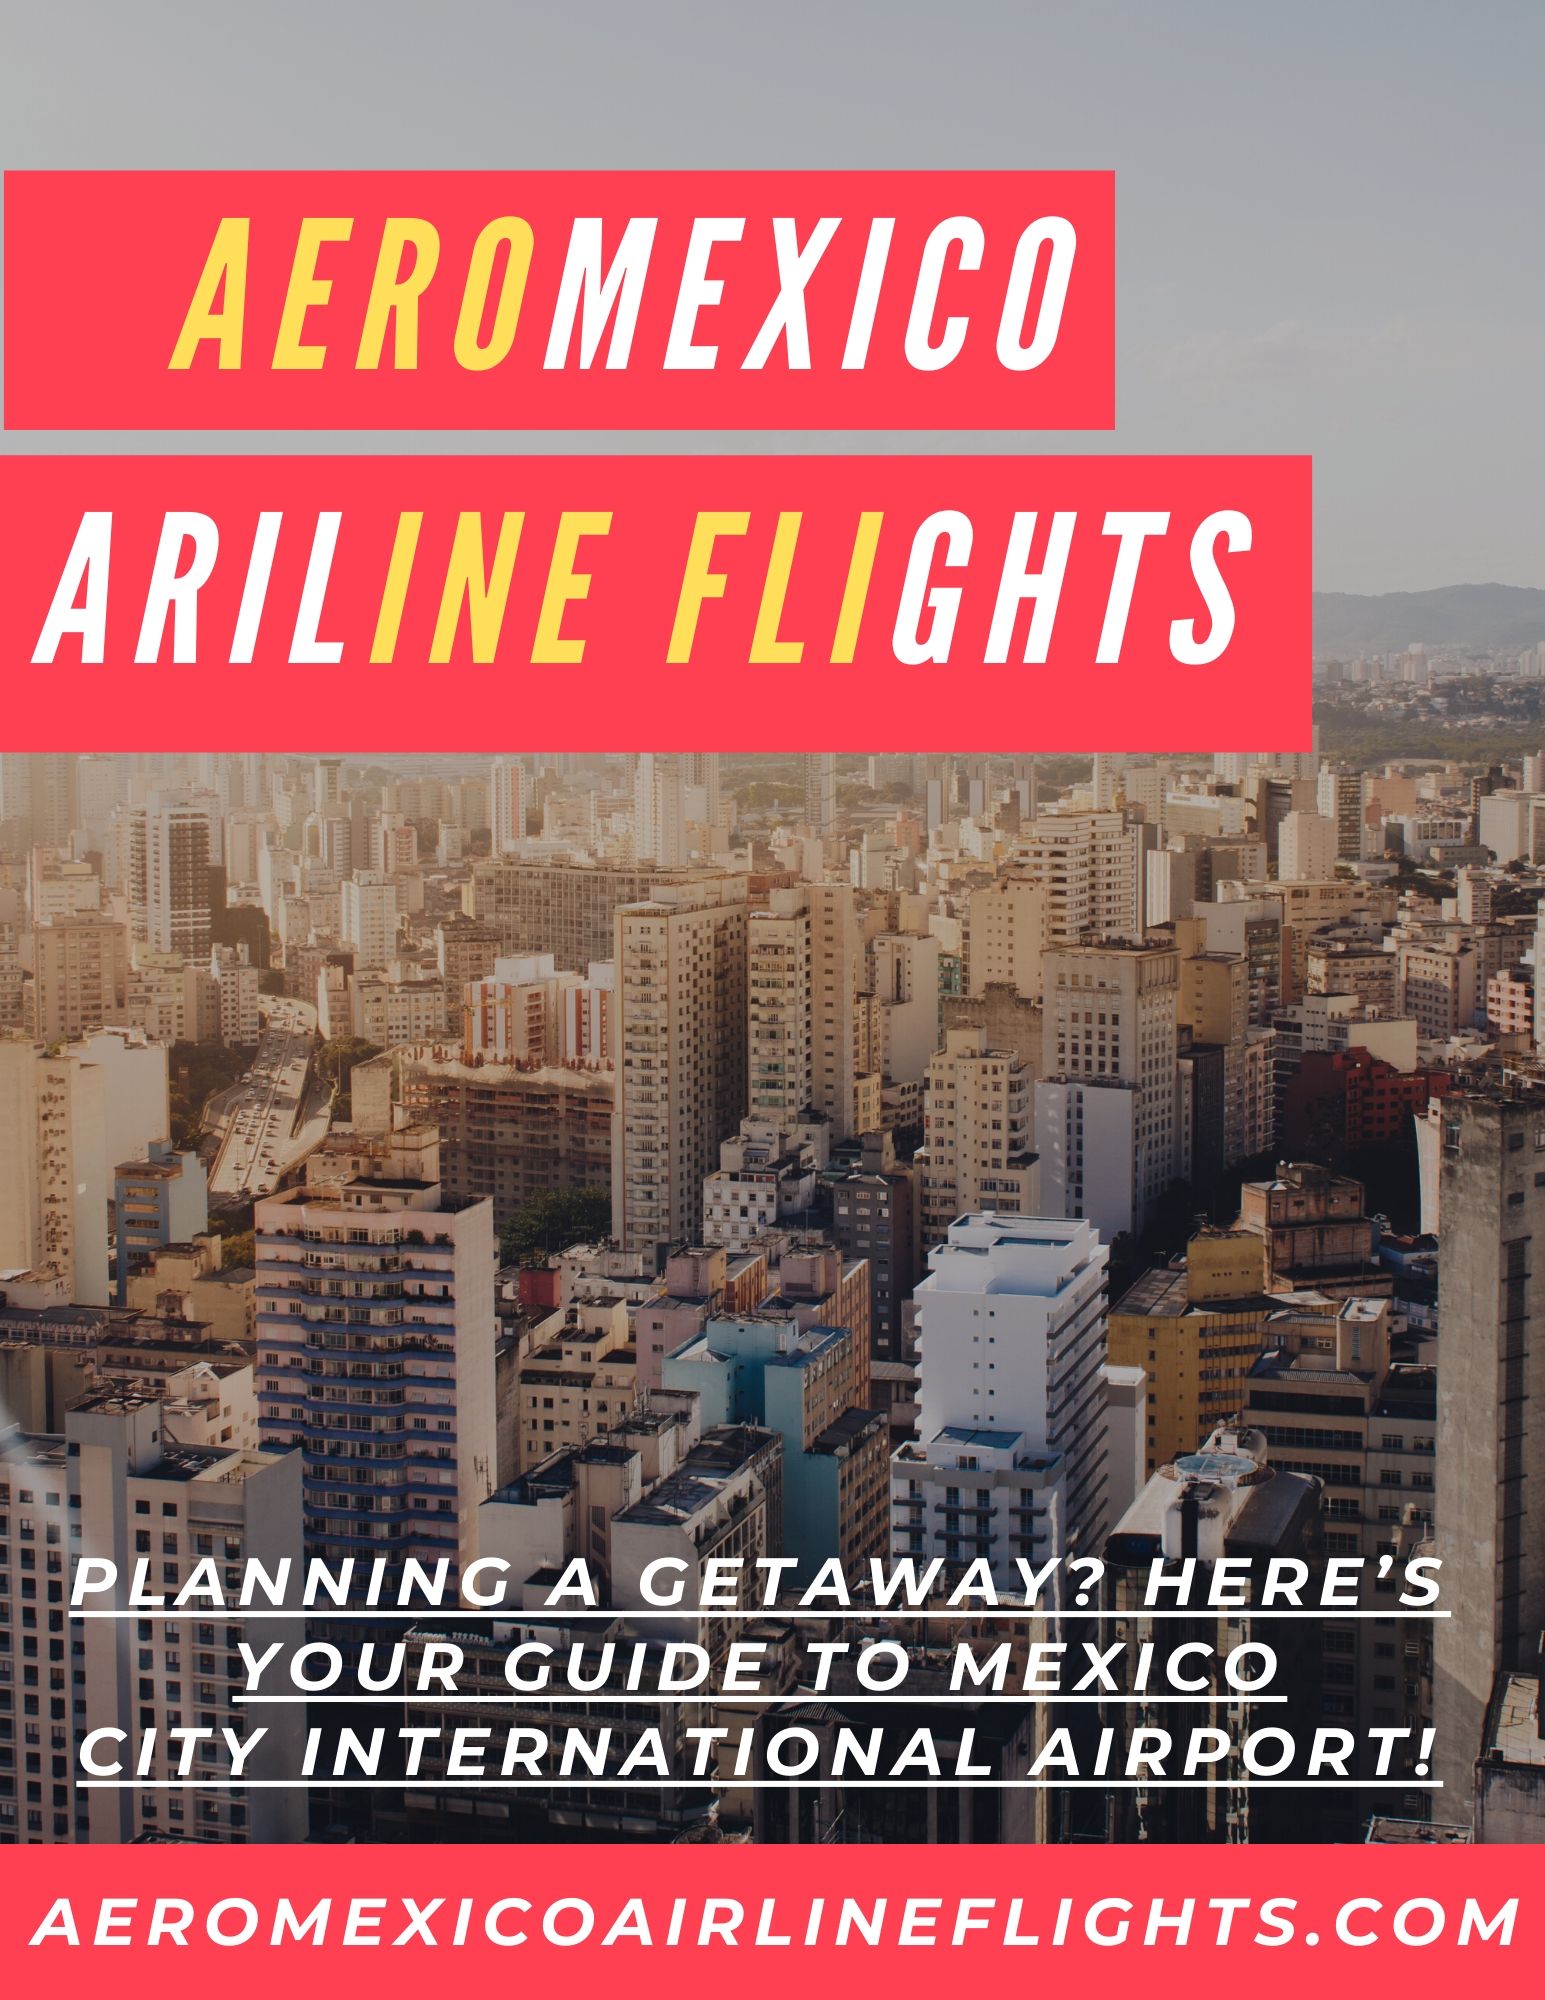 Planning a Getaway? Here’s Your Guide to Mexico City International Airport!